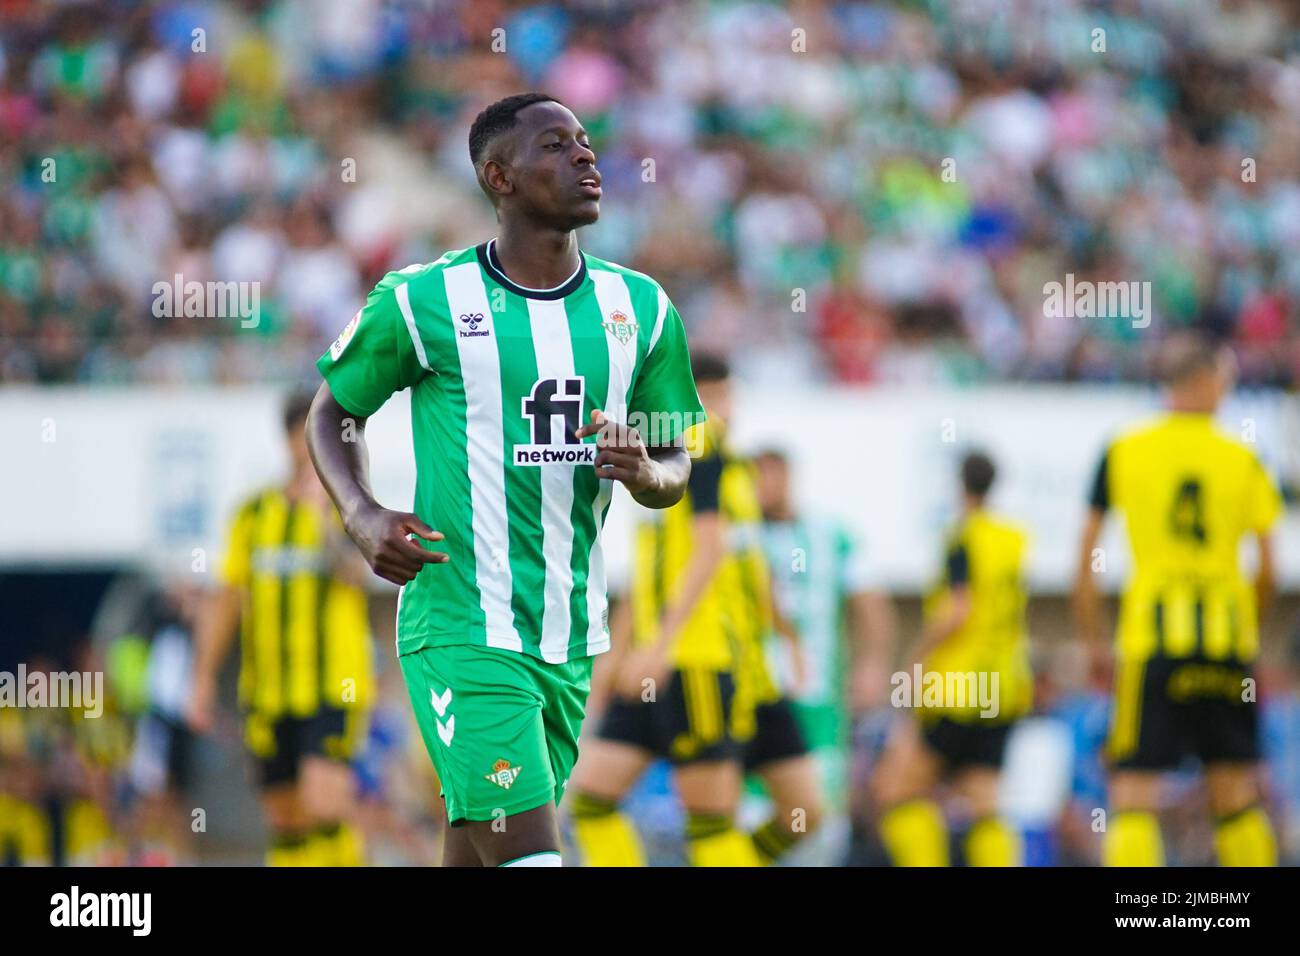 Malaga, Spain. 03rd Aug, 2022. Luiz Henrique seen during the Preseason friendly match between Real Betis and Real Zaragoza at Estadio de Atletismo Ciudad de Malaga. Final Score Real Betis 2:2 Real Zaragoza. Credit: SOPA Images Limited/Alamy Live News Stock Photo